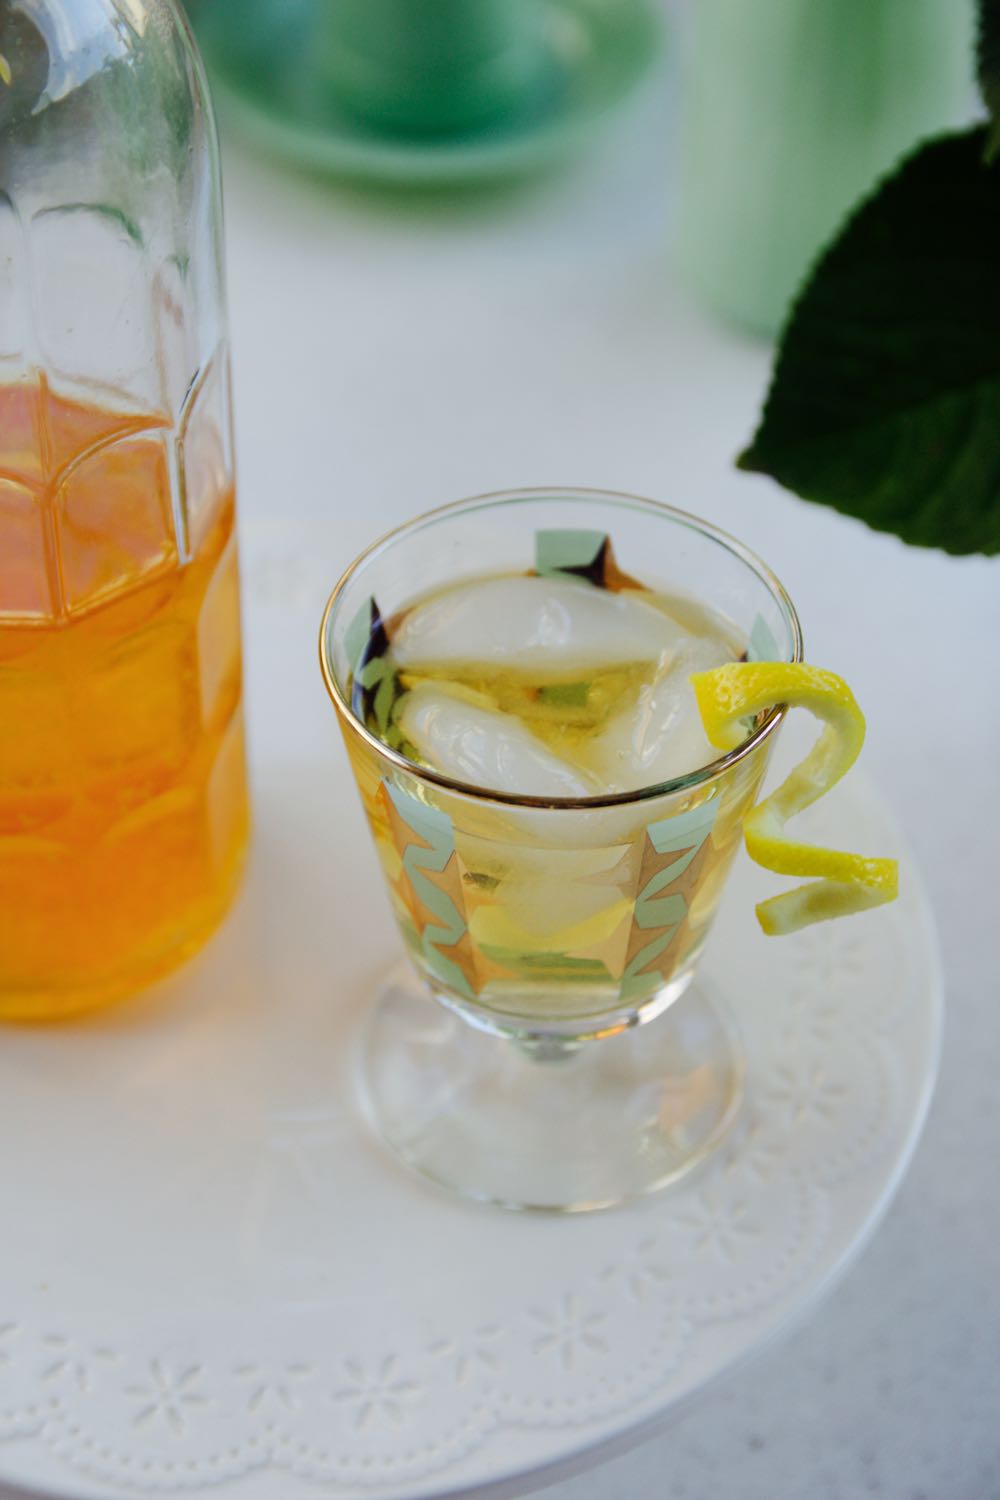 Recipe for a cocktail with lemon juice, simple syrup and orange vodka